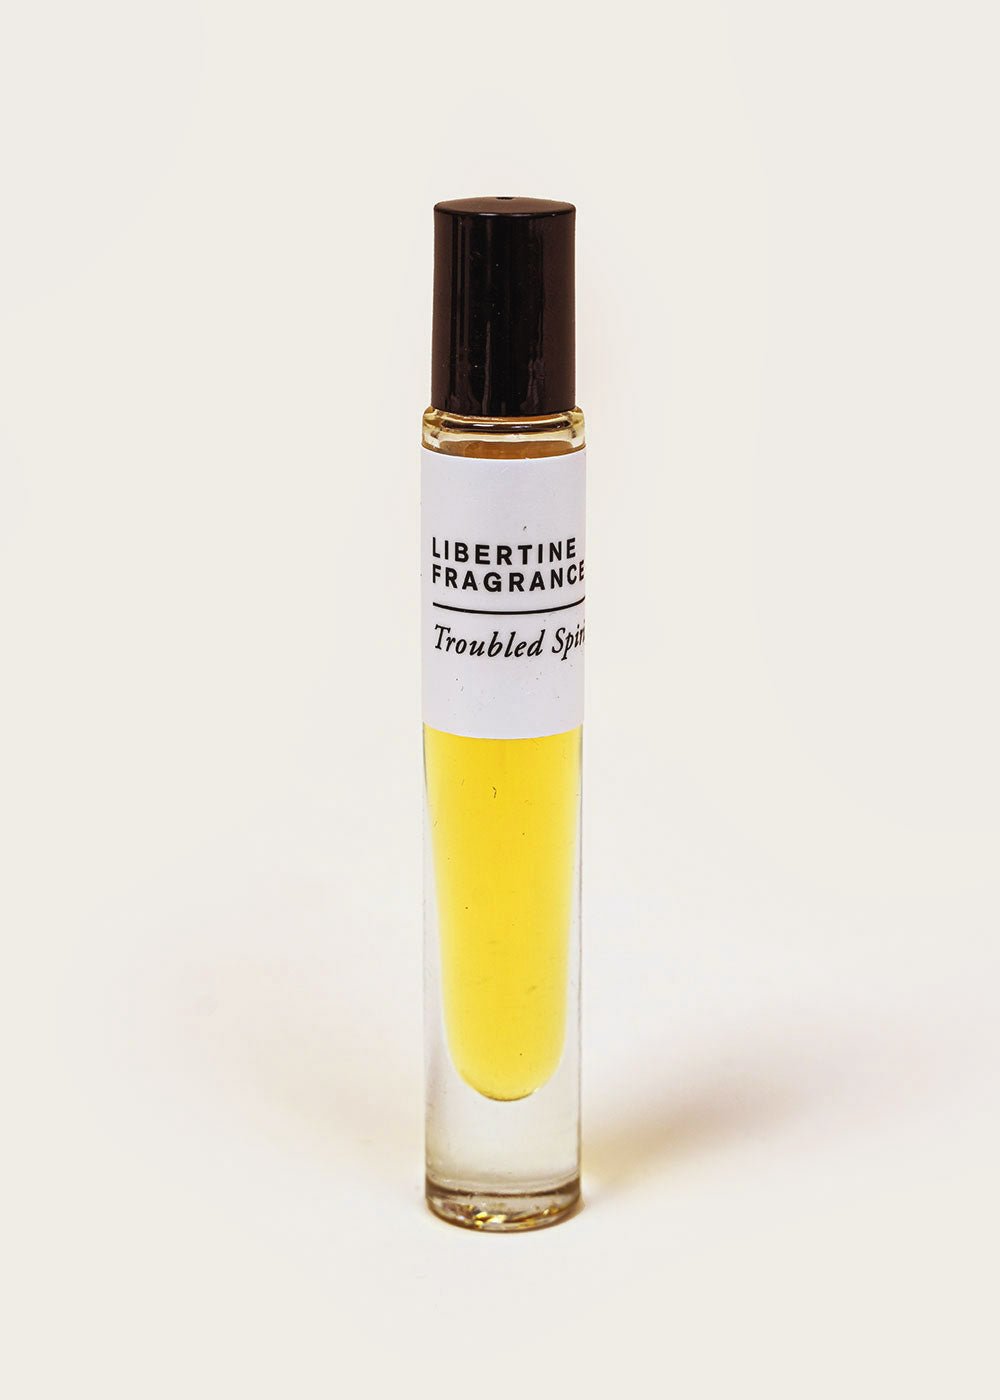 Libertine Fragrance Troubled Spirits Perfume Oil - New Classics Studios Sustainable Ethical Fashion Canada